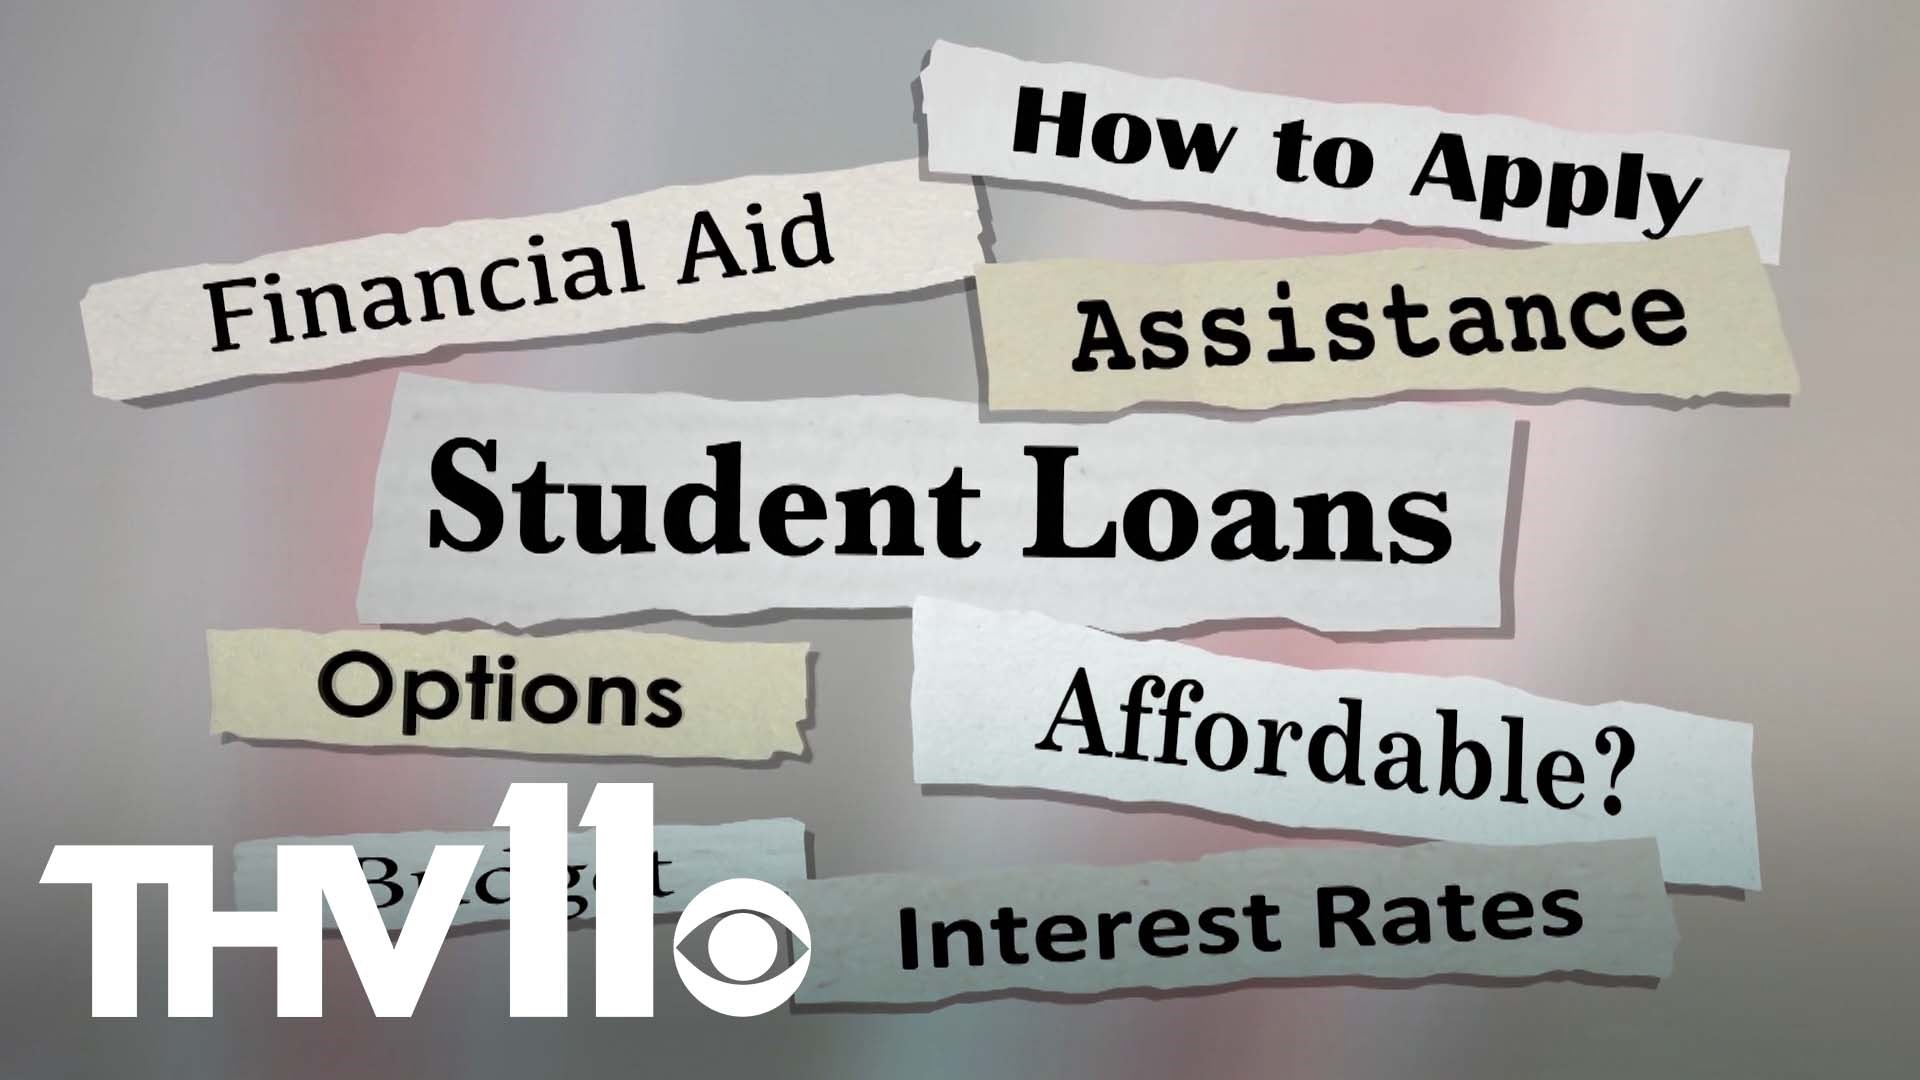 Last month President Biden extended the freeze on federal student loan payments to August 31st. That has many wondering-- should I start paying now or should I wait?